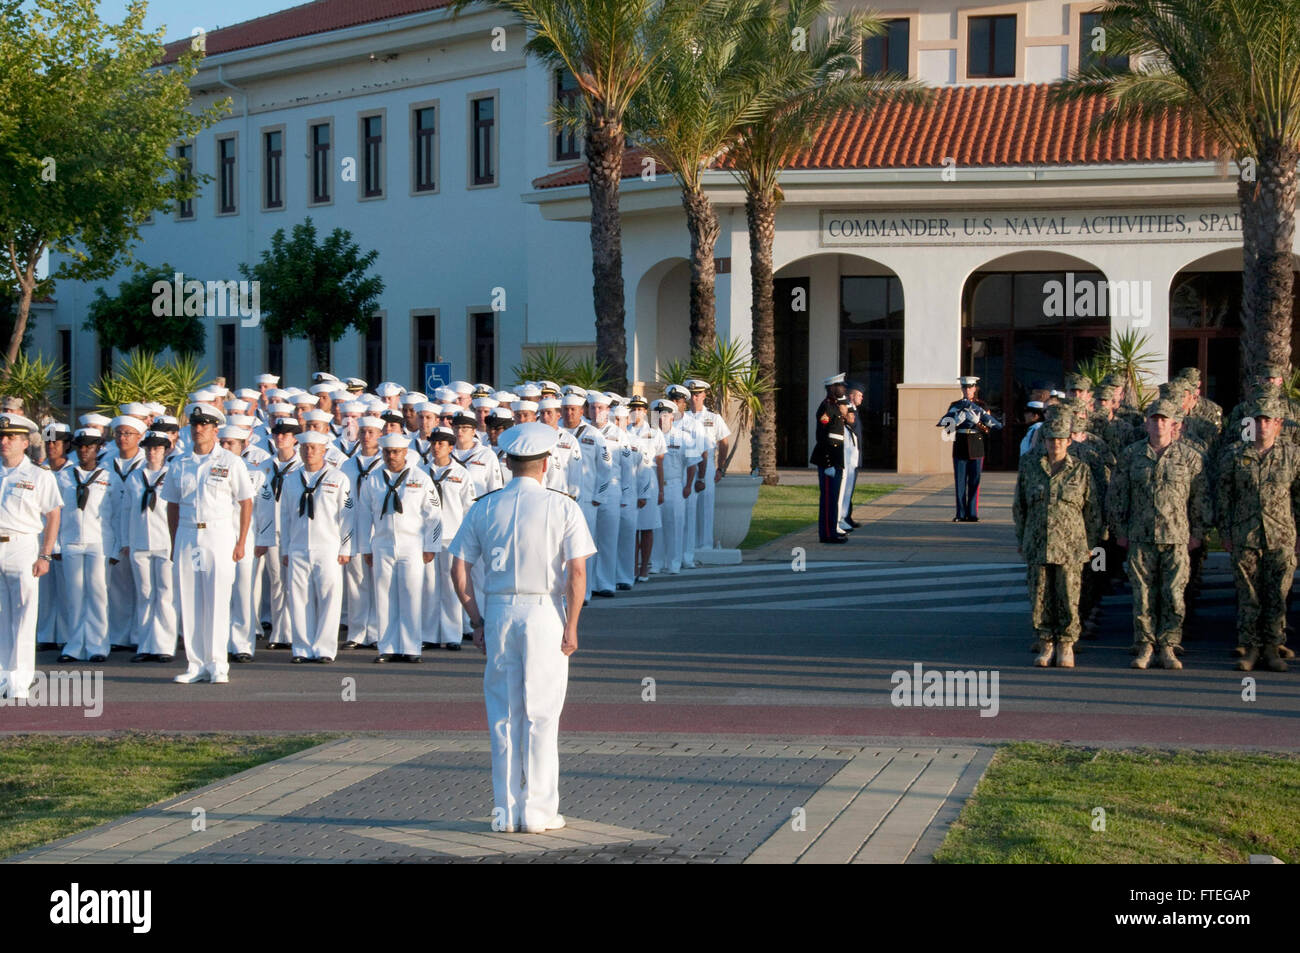 NAVAL STATION ROTA, Spain (July 2, 2015) – Cmdr. Neil Hoffman, Rota’s executive officer, awaits the arrival of the official party during the annual flag-raising ceremony aboard Naval Station Rota, Spain, July 2. While raising the flag is a daily occurrence on most U.S. military installations around the world, Naval Station Rota is only permitted to fly the American flag with special permission from the base’s Spanish admiral in chief in accordance with the Agreement on Defense Cooperation. (U.S. Navy photo by Mass Communication Specialist 2nd Class Grant Wamack/Released) Stock Photo